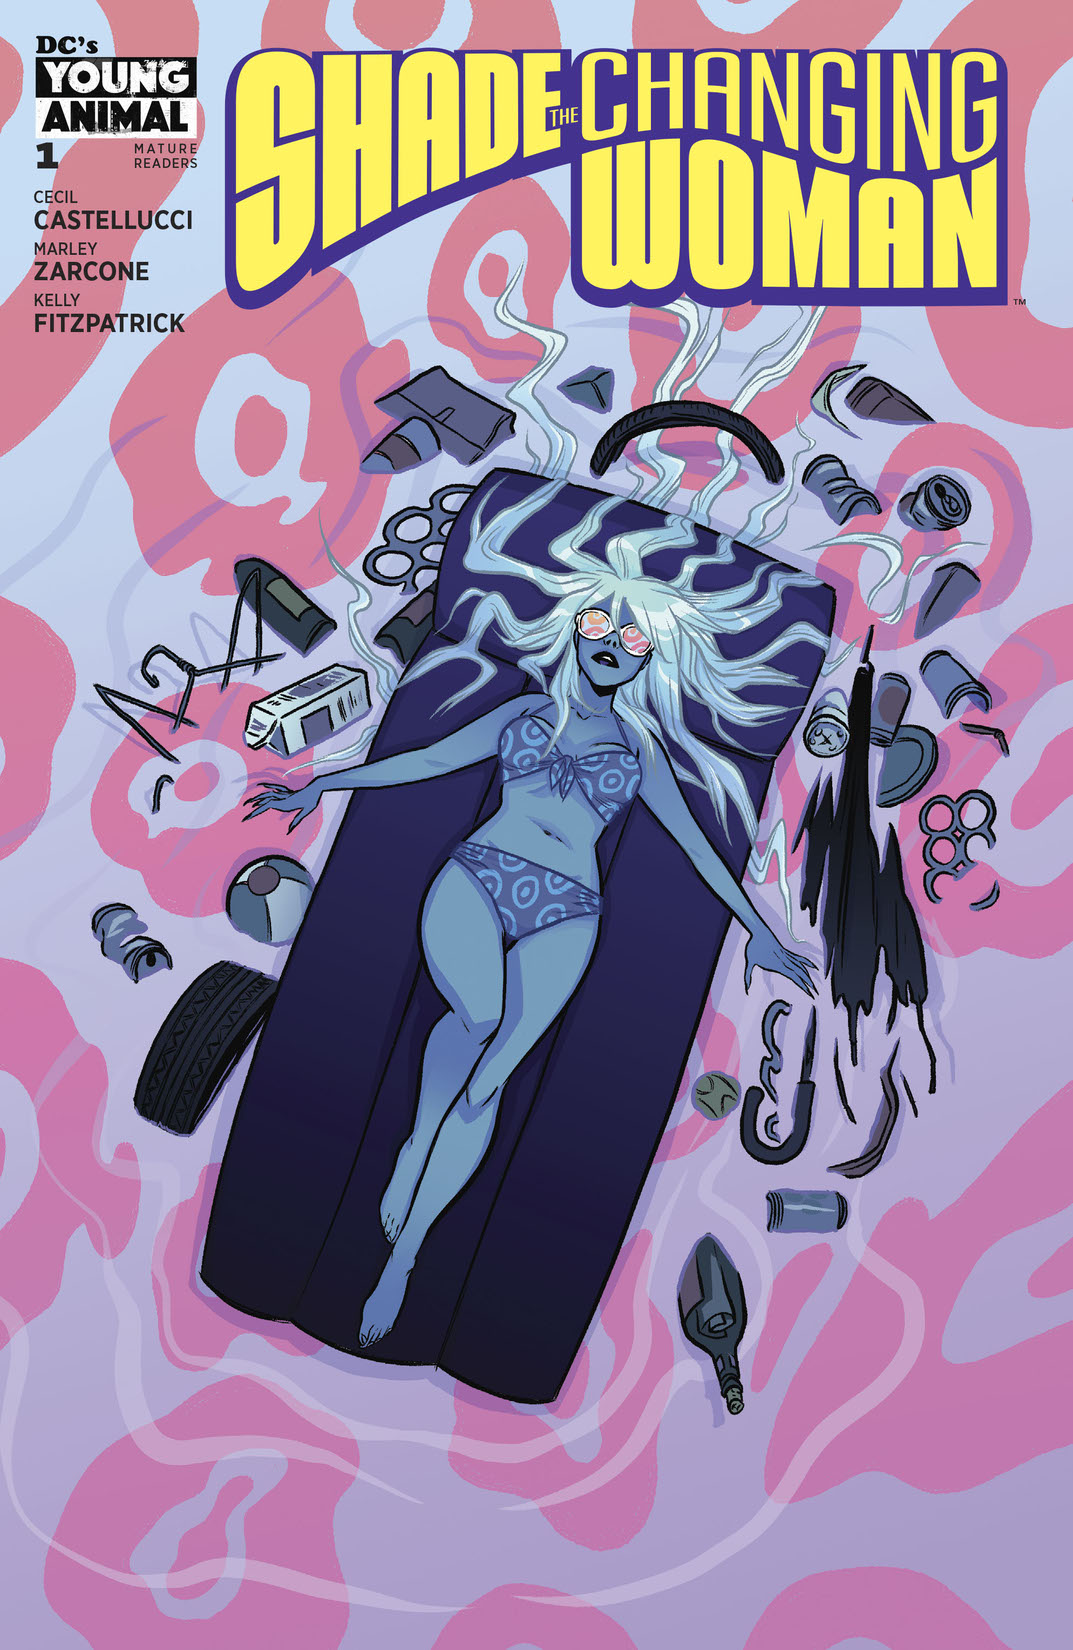 Shade, The Changing Woman #1 preview images